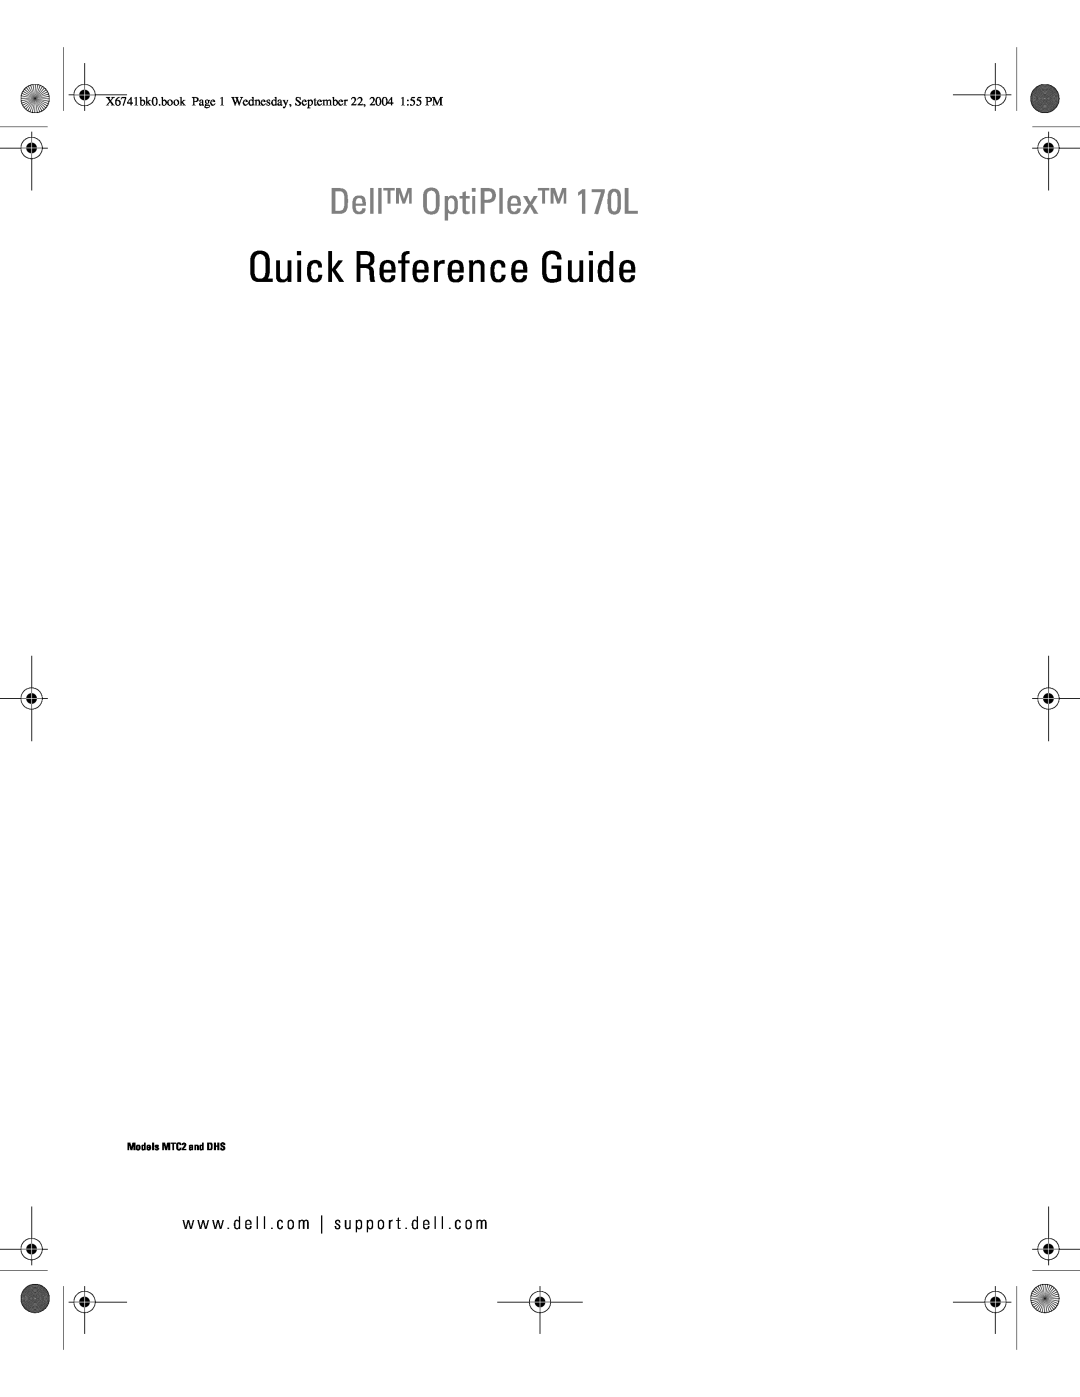 Dell manual Quick Reference Guide, Dell OptiPlex 170L, X6741bk0.book Page 1 Wednesday, September 22, 2004 155 PM 